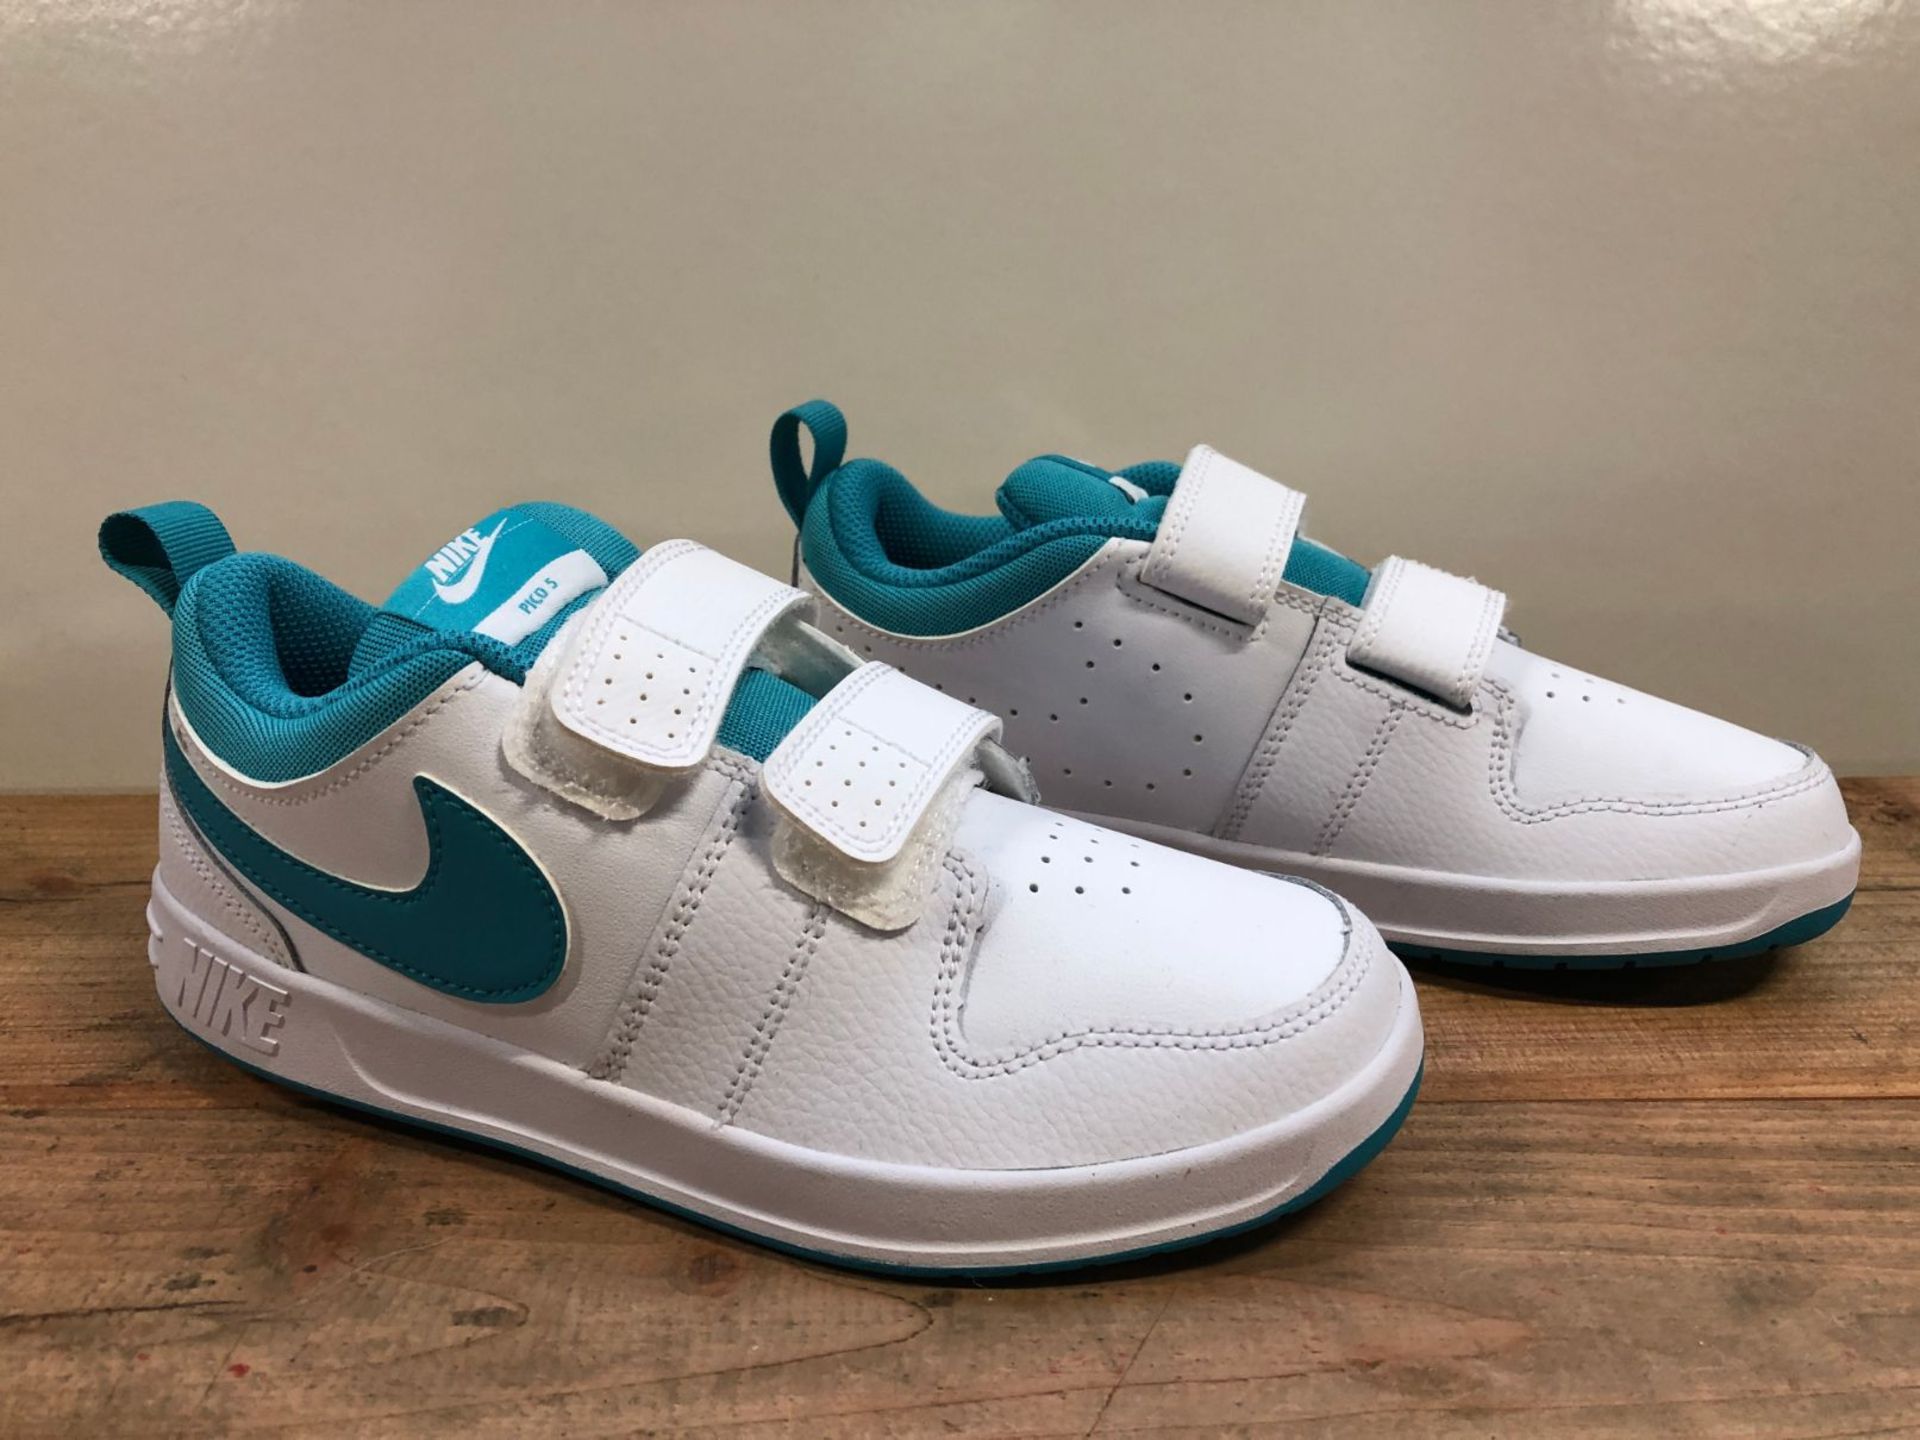 1 X PAIR OF NIKE KIDS' PICO 5 (PSV) TRAINERS / SIZE: 1.5 UK / RRP £25.00